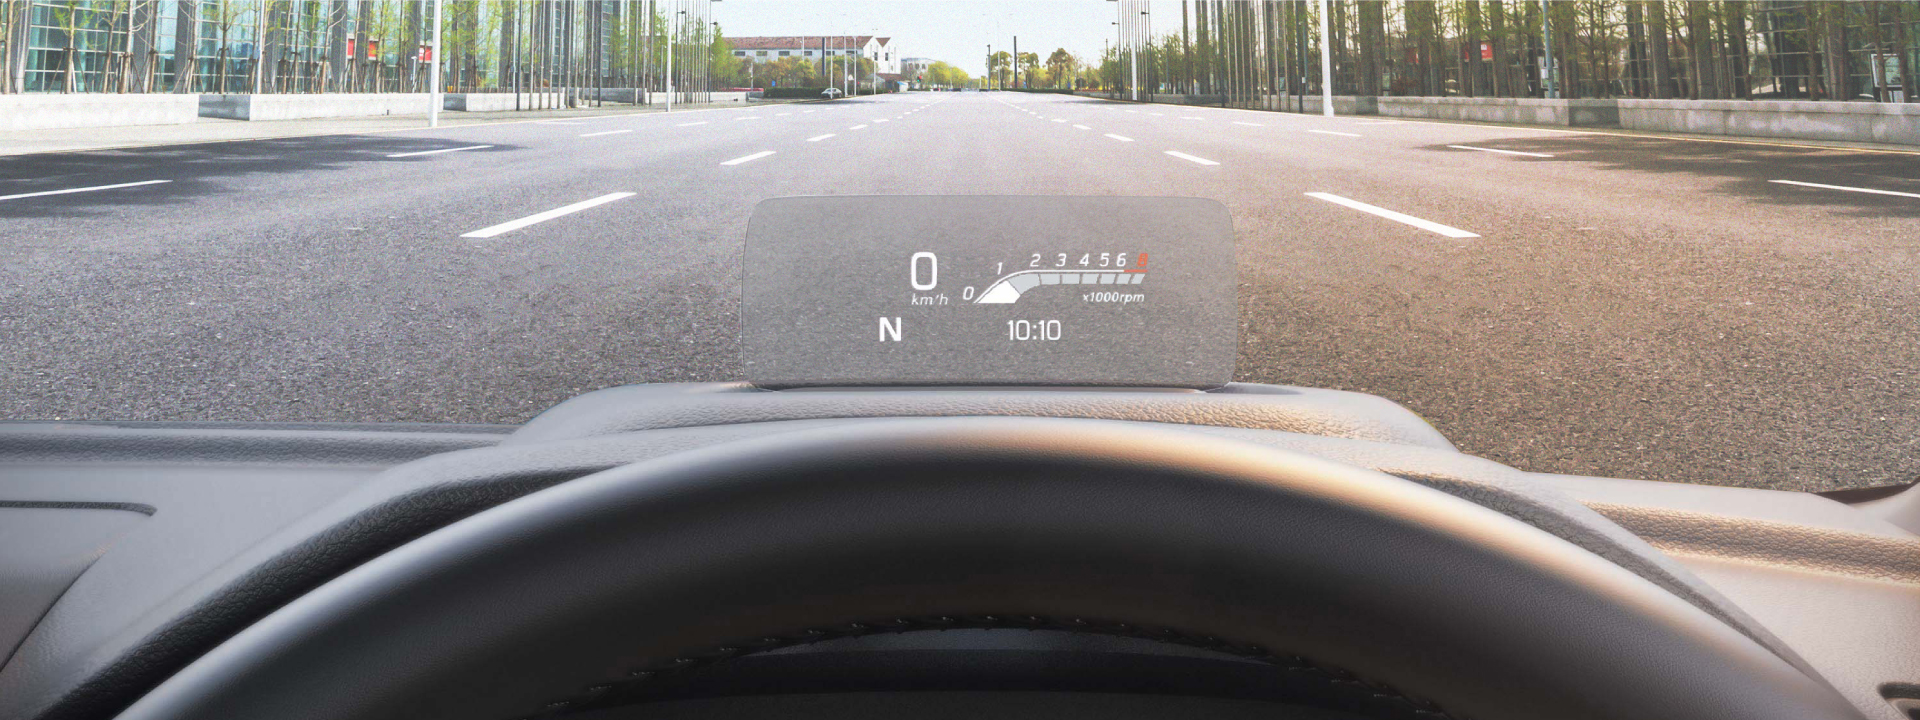 https://www.marutisuzuki.com/engage/images/technology/new-age-features/head-up-display/head-up-display-banner.jpg